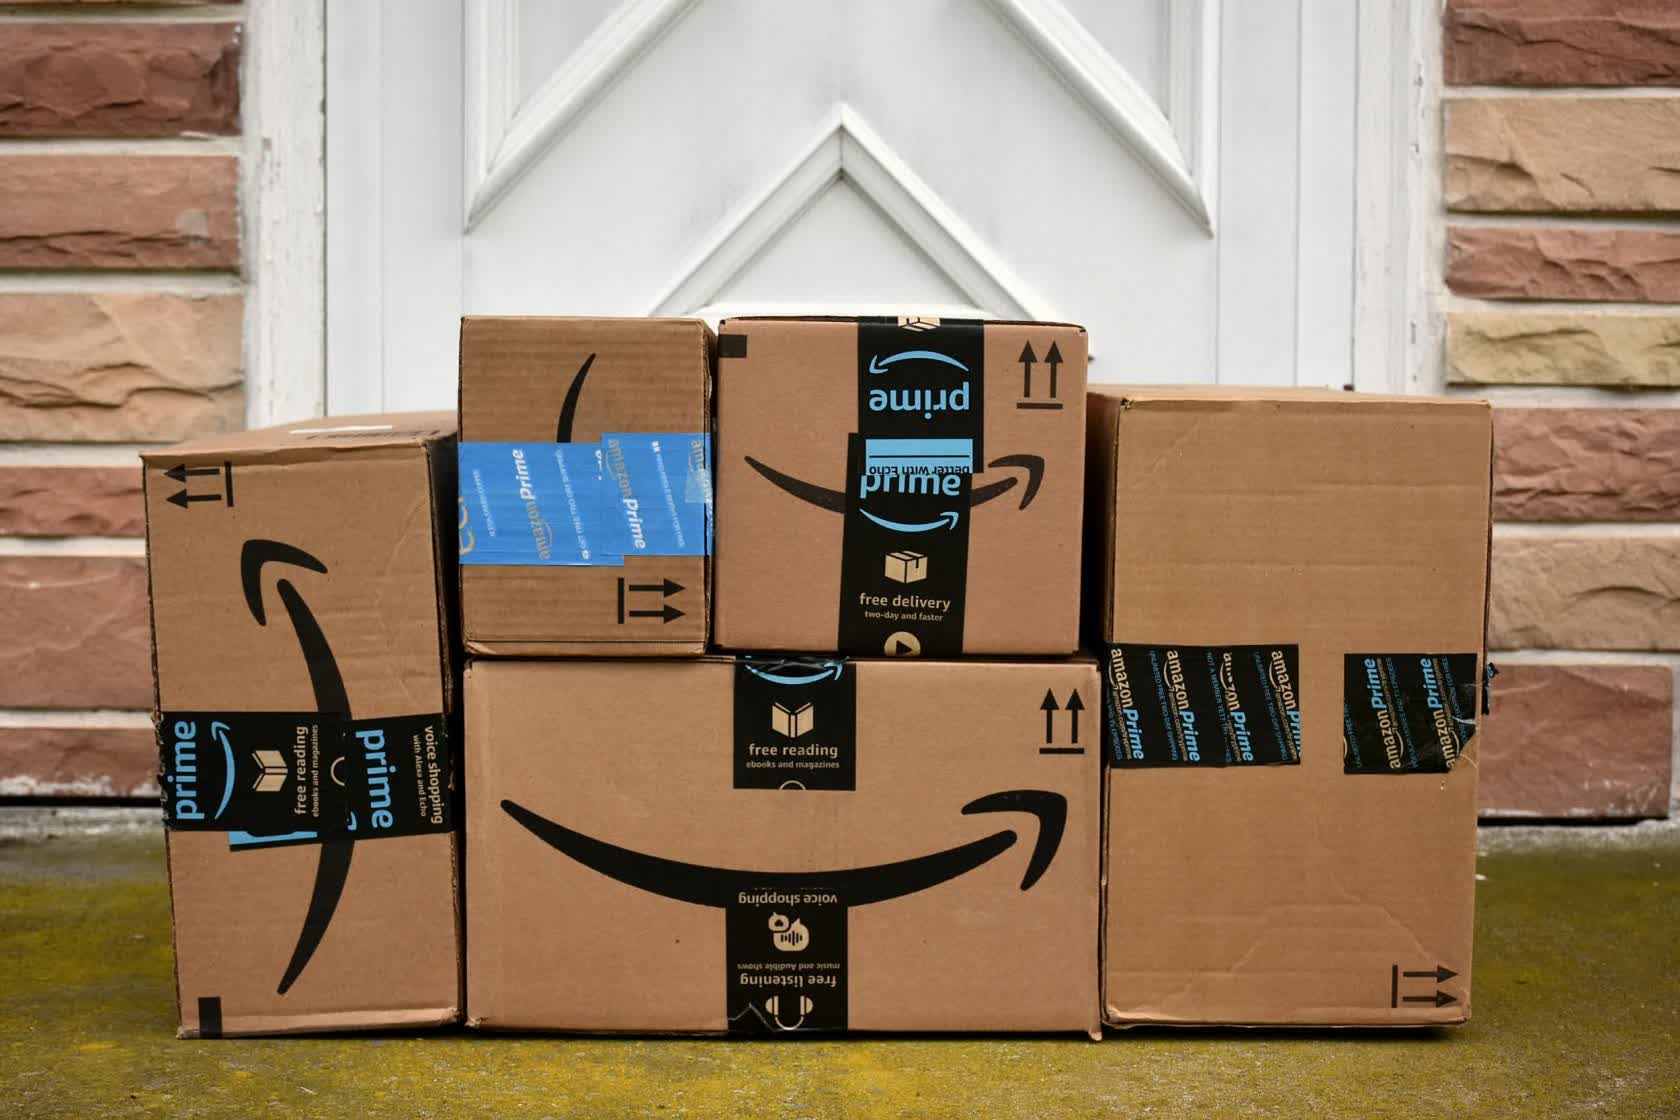 Amazon pulled in $96.1 billion in sales during the third quarter of 2020